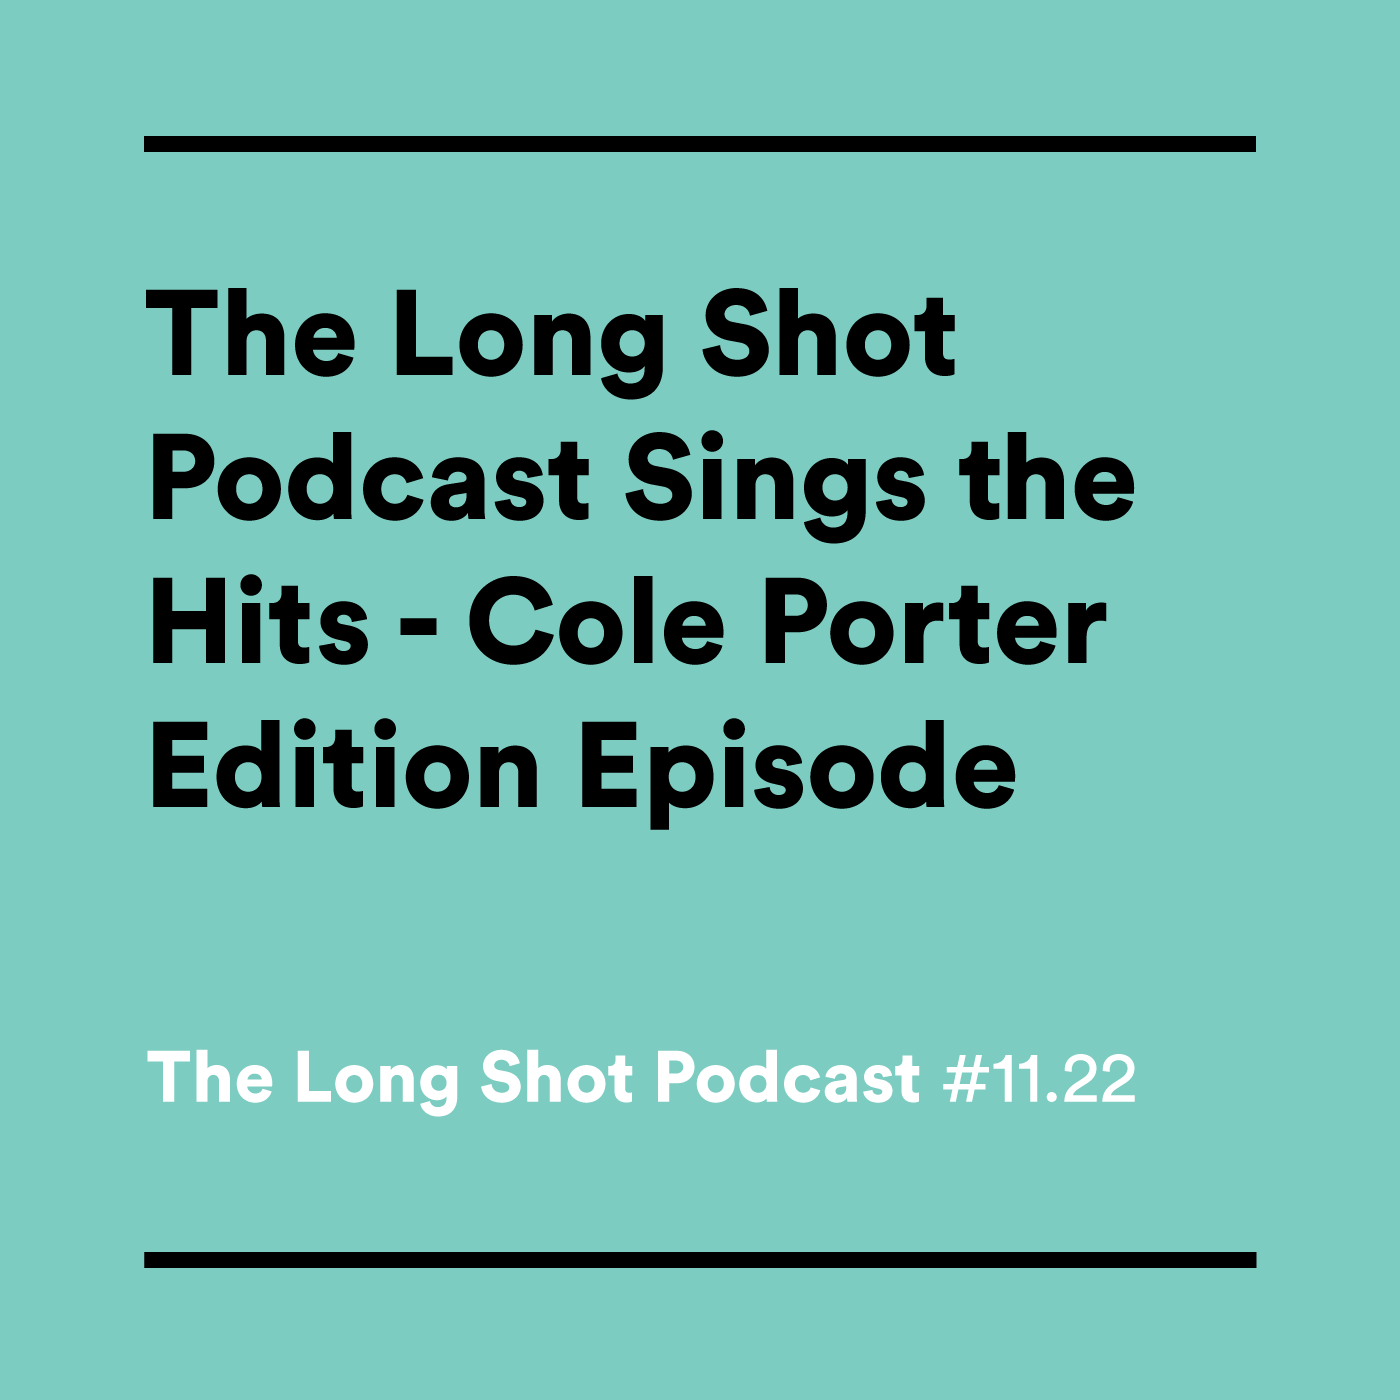 #11.22 The Long Shot Podcasts Sings the Hits - Cole Porter Edition Episode